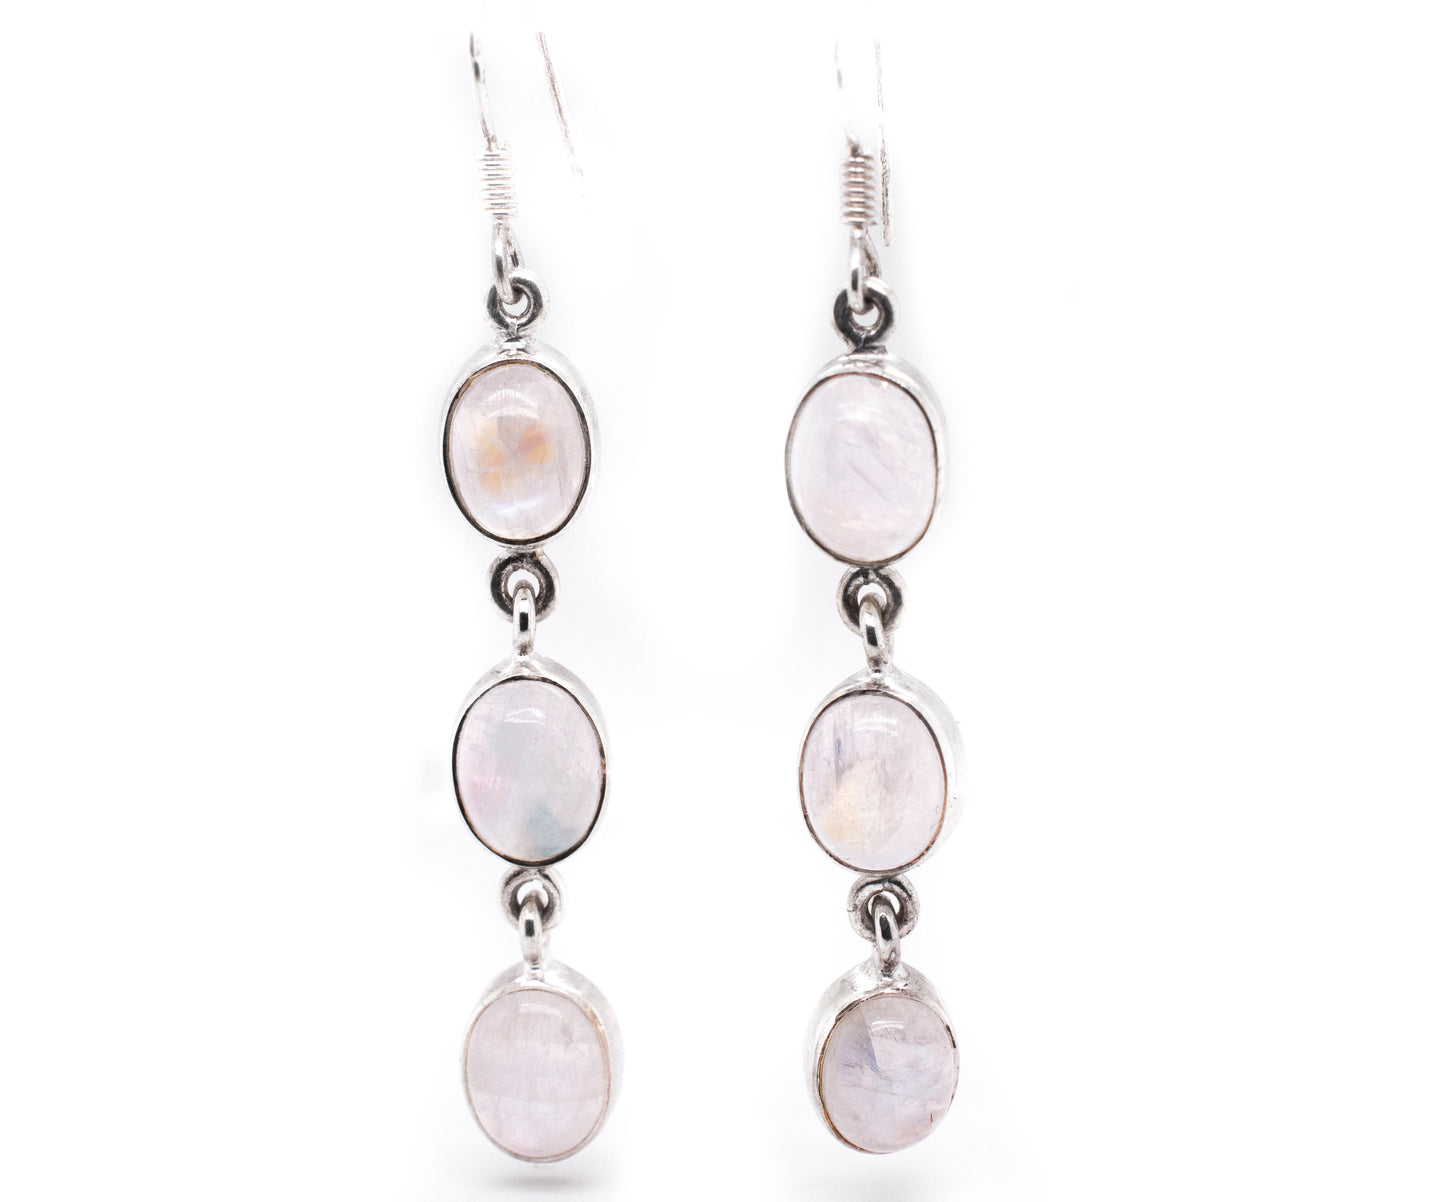 Super Silver's Radiant Long Earrings with Three Moonstones are made of .925 Sterling Silver.